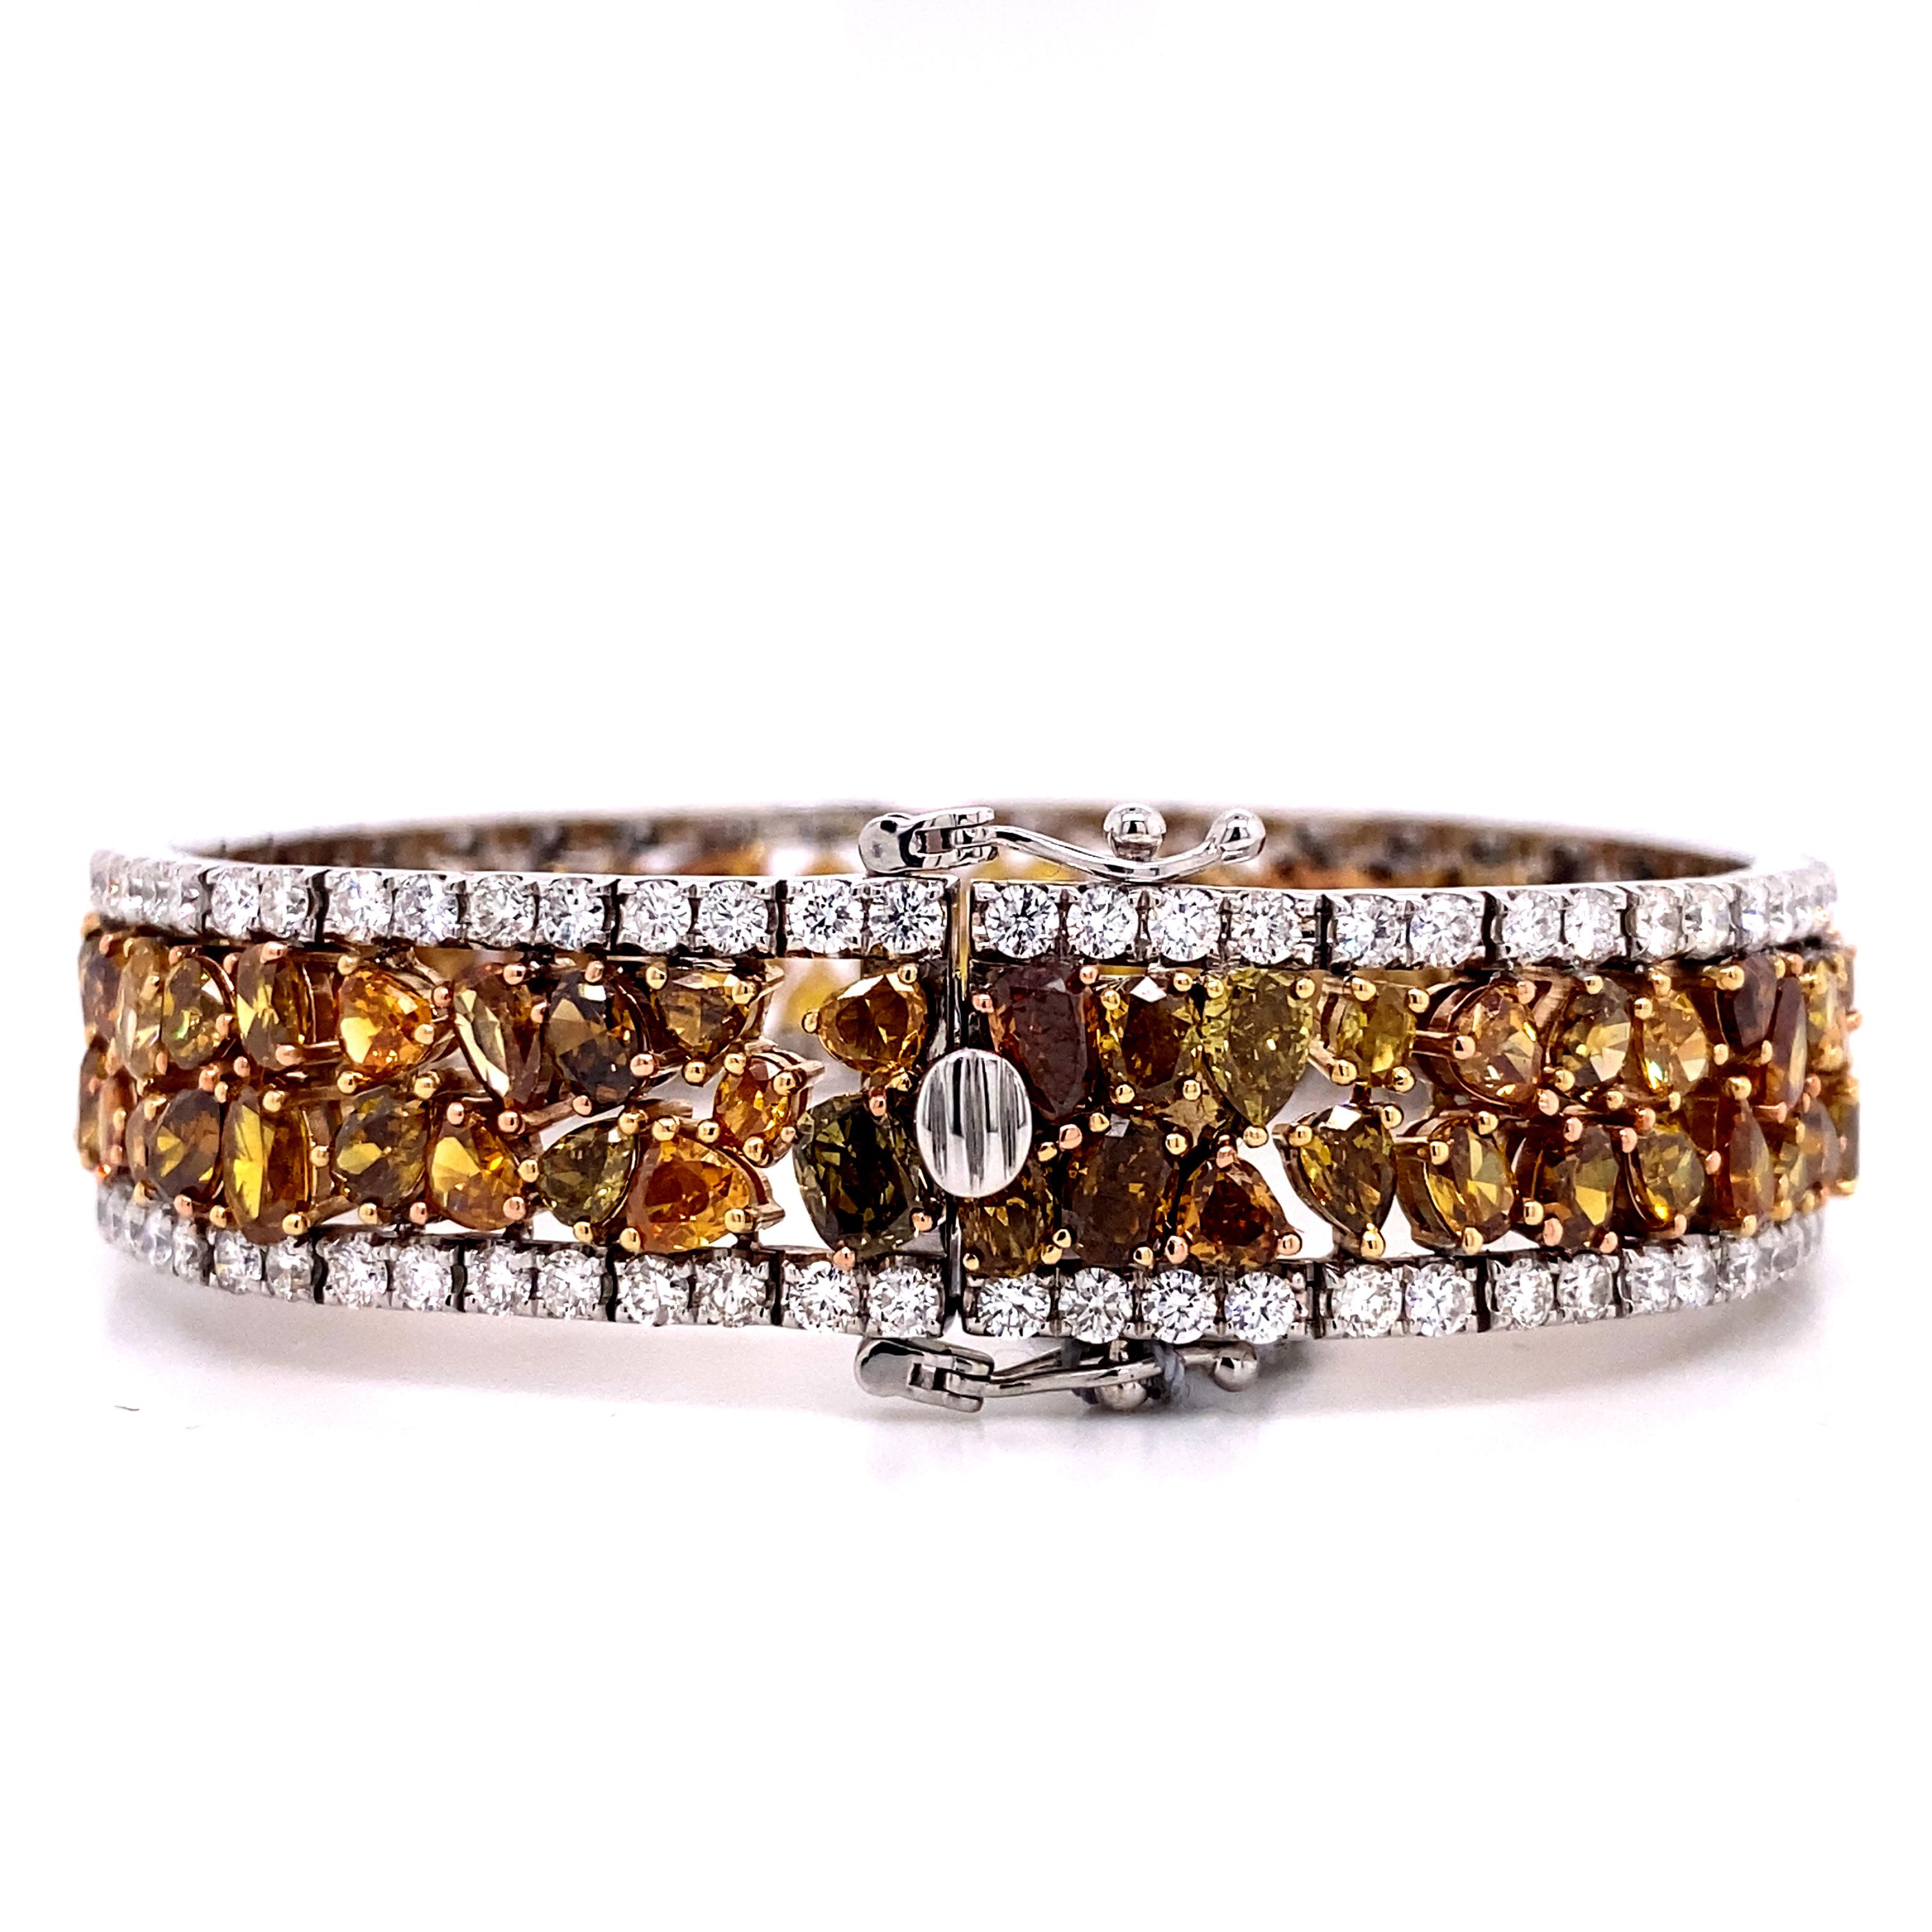 This extravagant diamond encrusted bracelet features 36 total carats of fancy colored natural diamonds in a seamless handmade design. It includes, fancy orange diamonds, fancy brown diamonds diamonds, and fancy yellow diamonds, all set into handmade